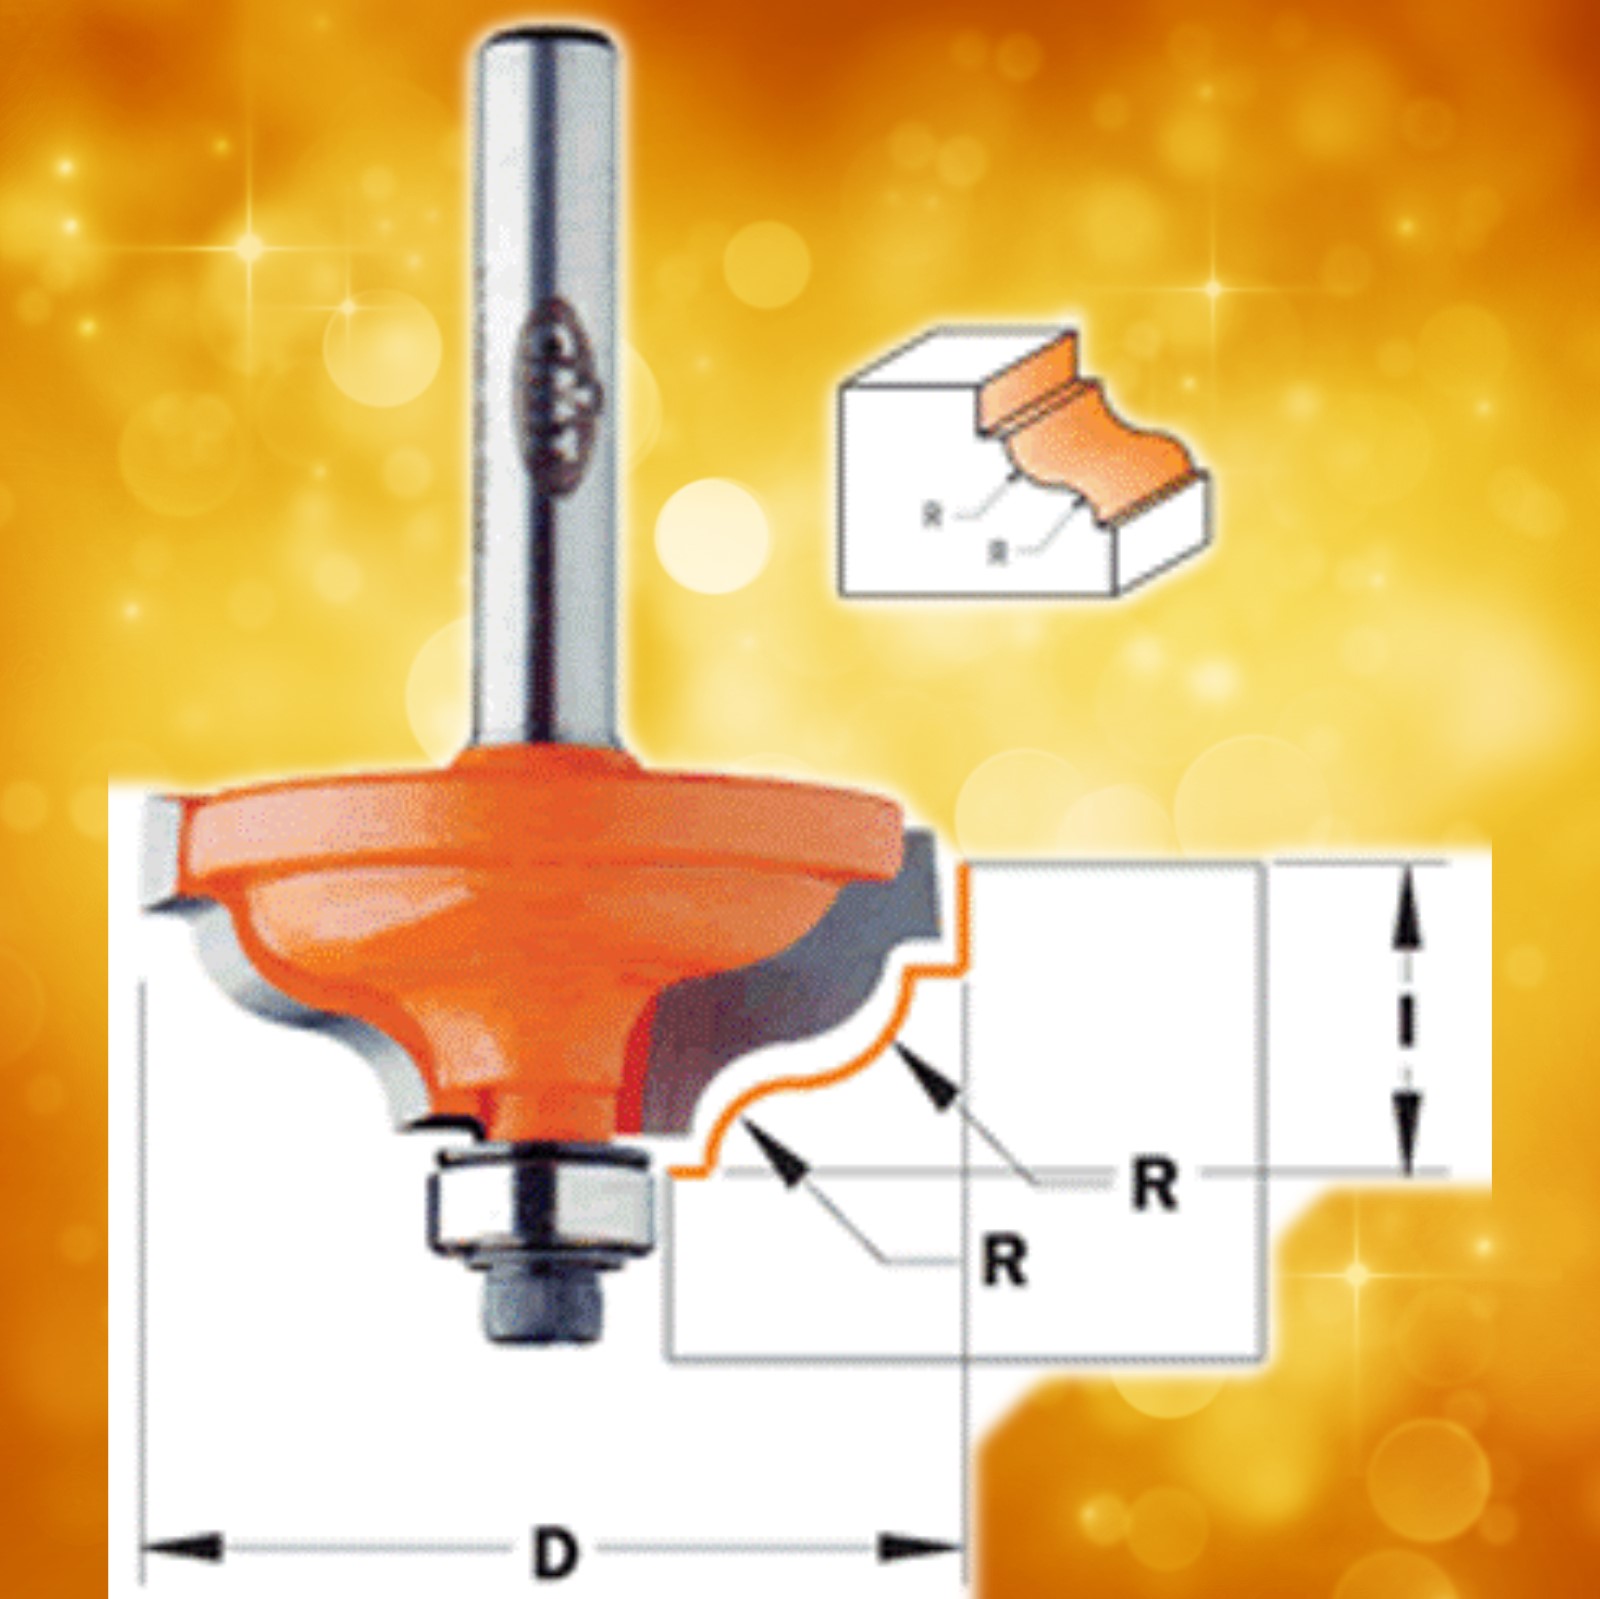 CMT Ogee with Fillet Router Bit 847.825.11 (Series 847) 3/16" - 9/64" radius, 1/2" shank